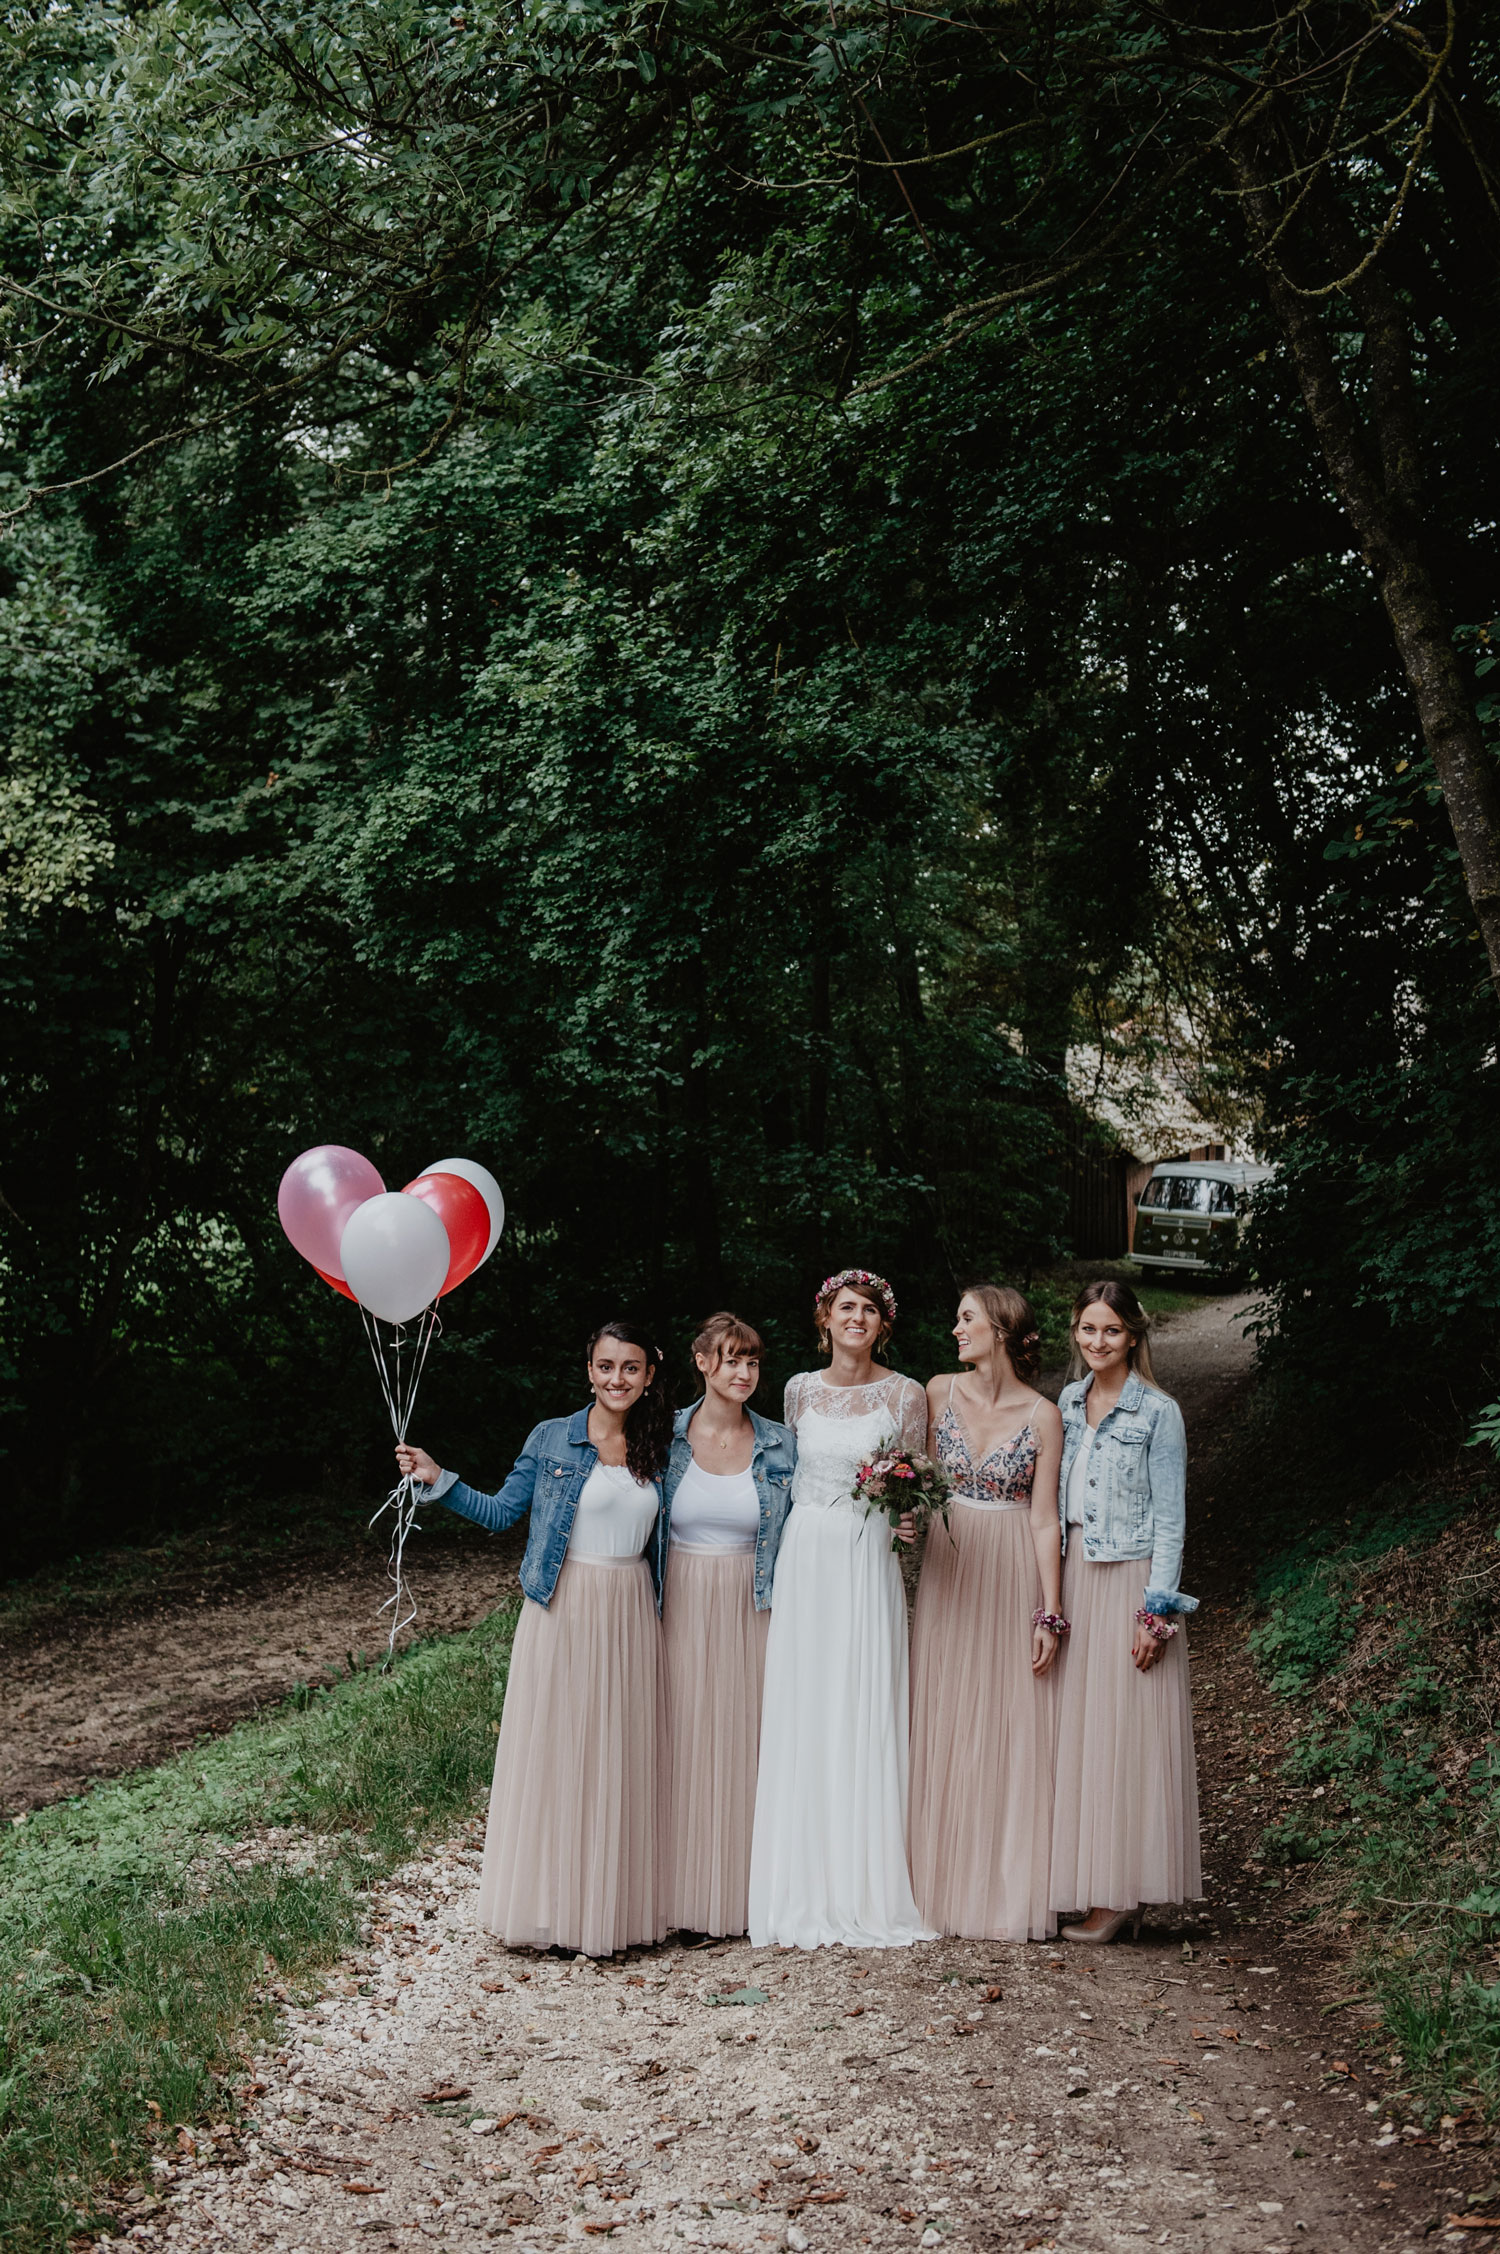 boho bride with flowercrown and bridesmaids in denim jackets pastel tulle skirts with balloons posing at tipi wedding in forest